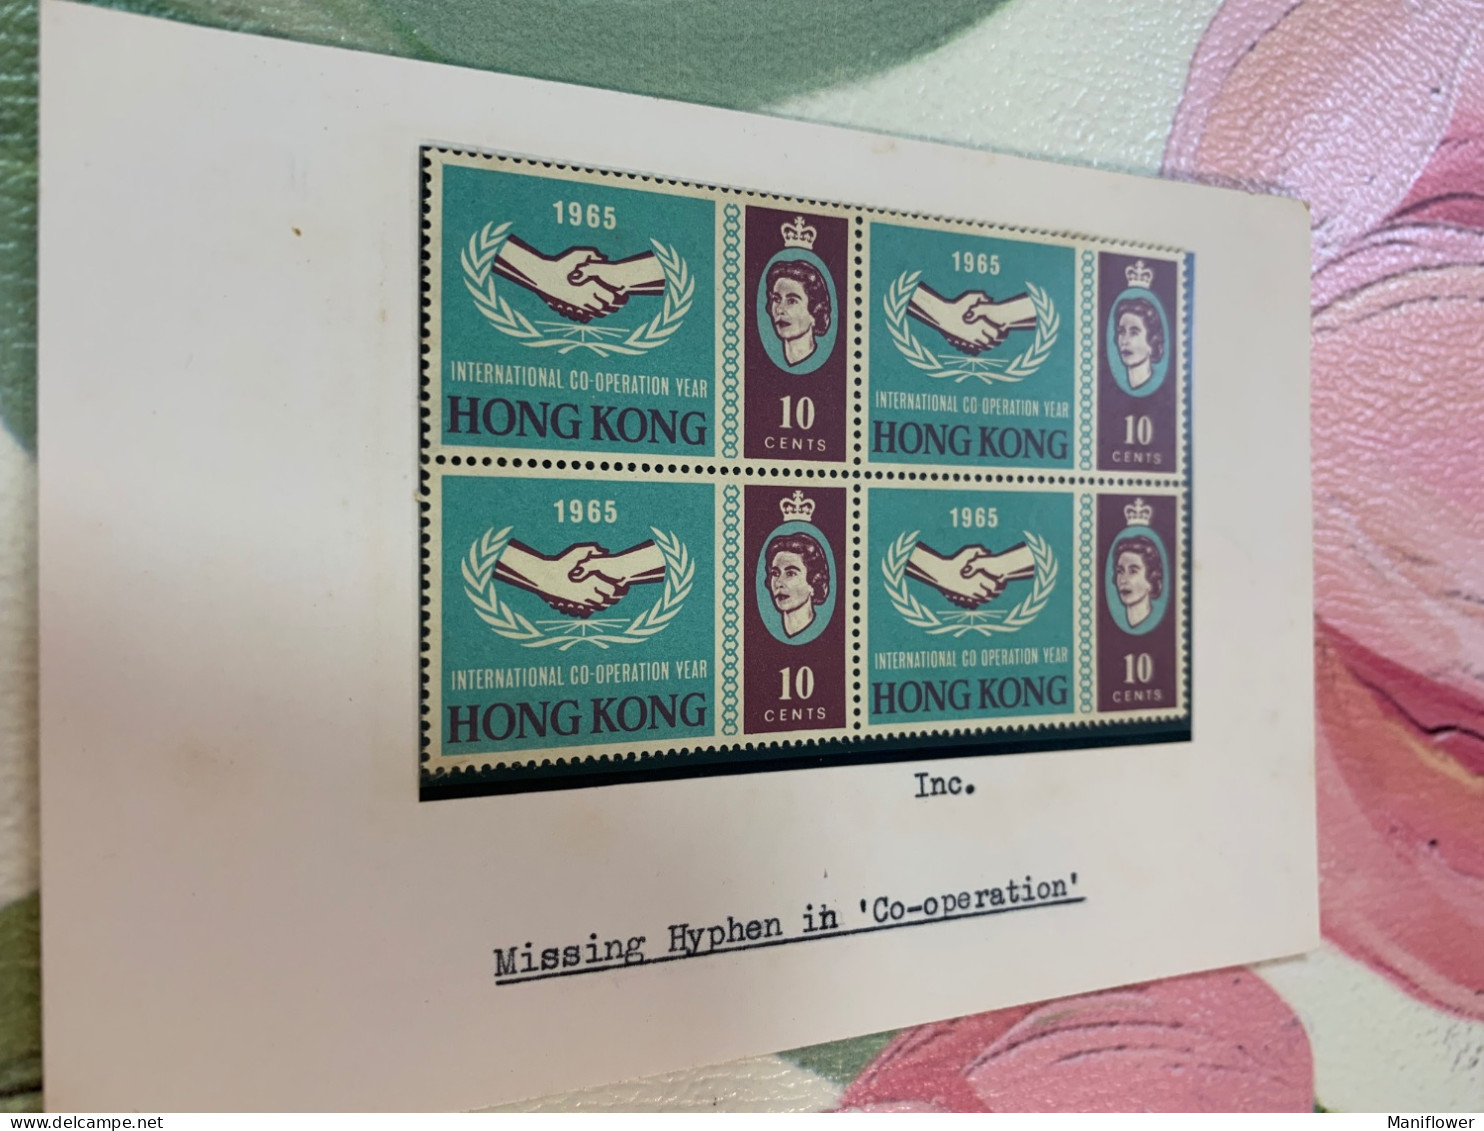 Hong Kong Stamp Error Missing Hyphen Refer To Yang Catalog Rare Attractive Pair - Covers & Documents